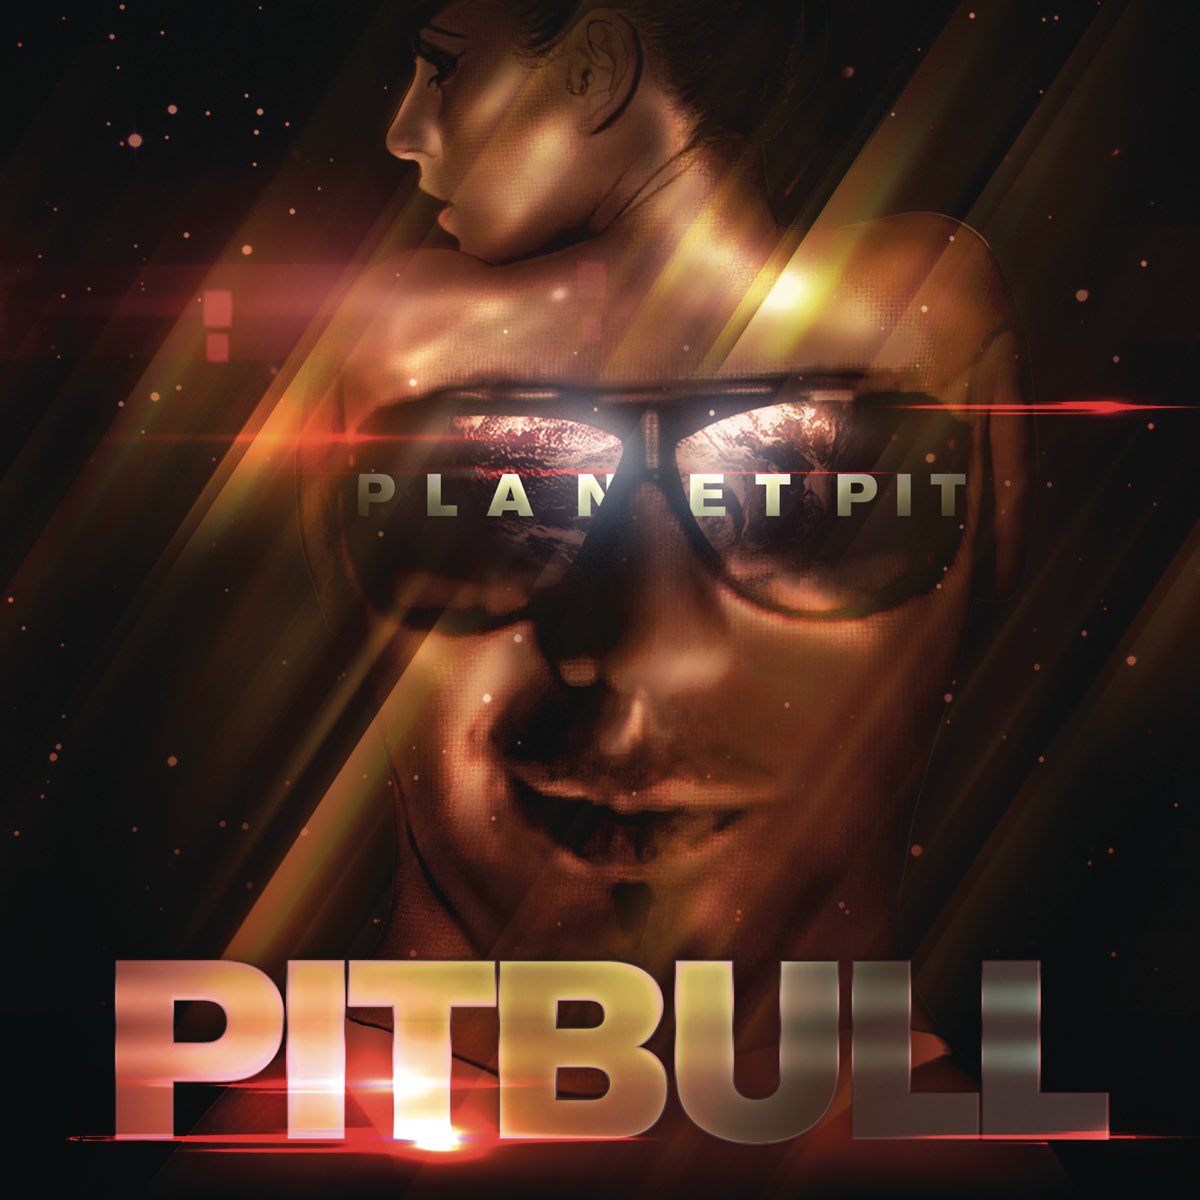 Pit (Deluxe Version) by Pitbull on Apple Music